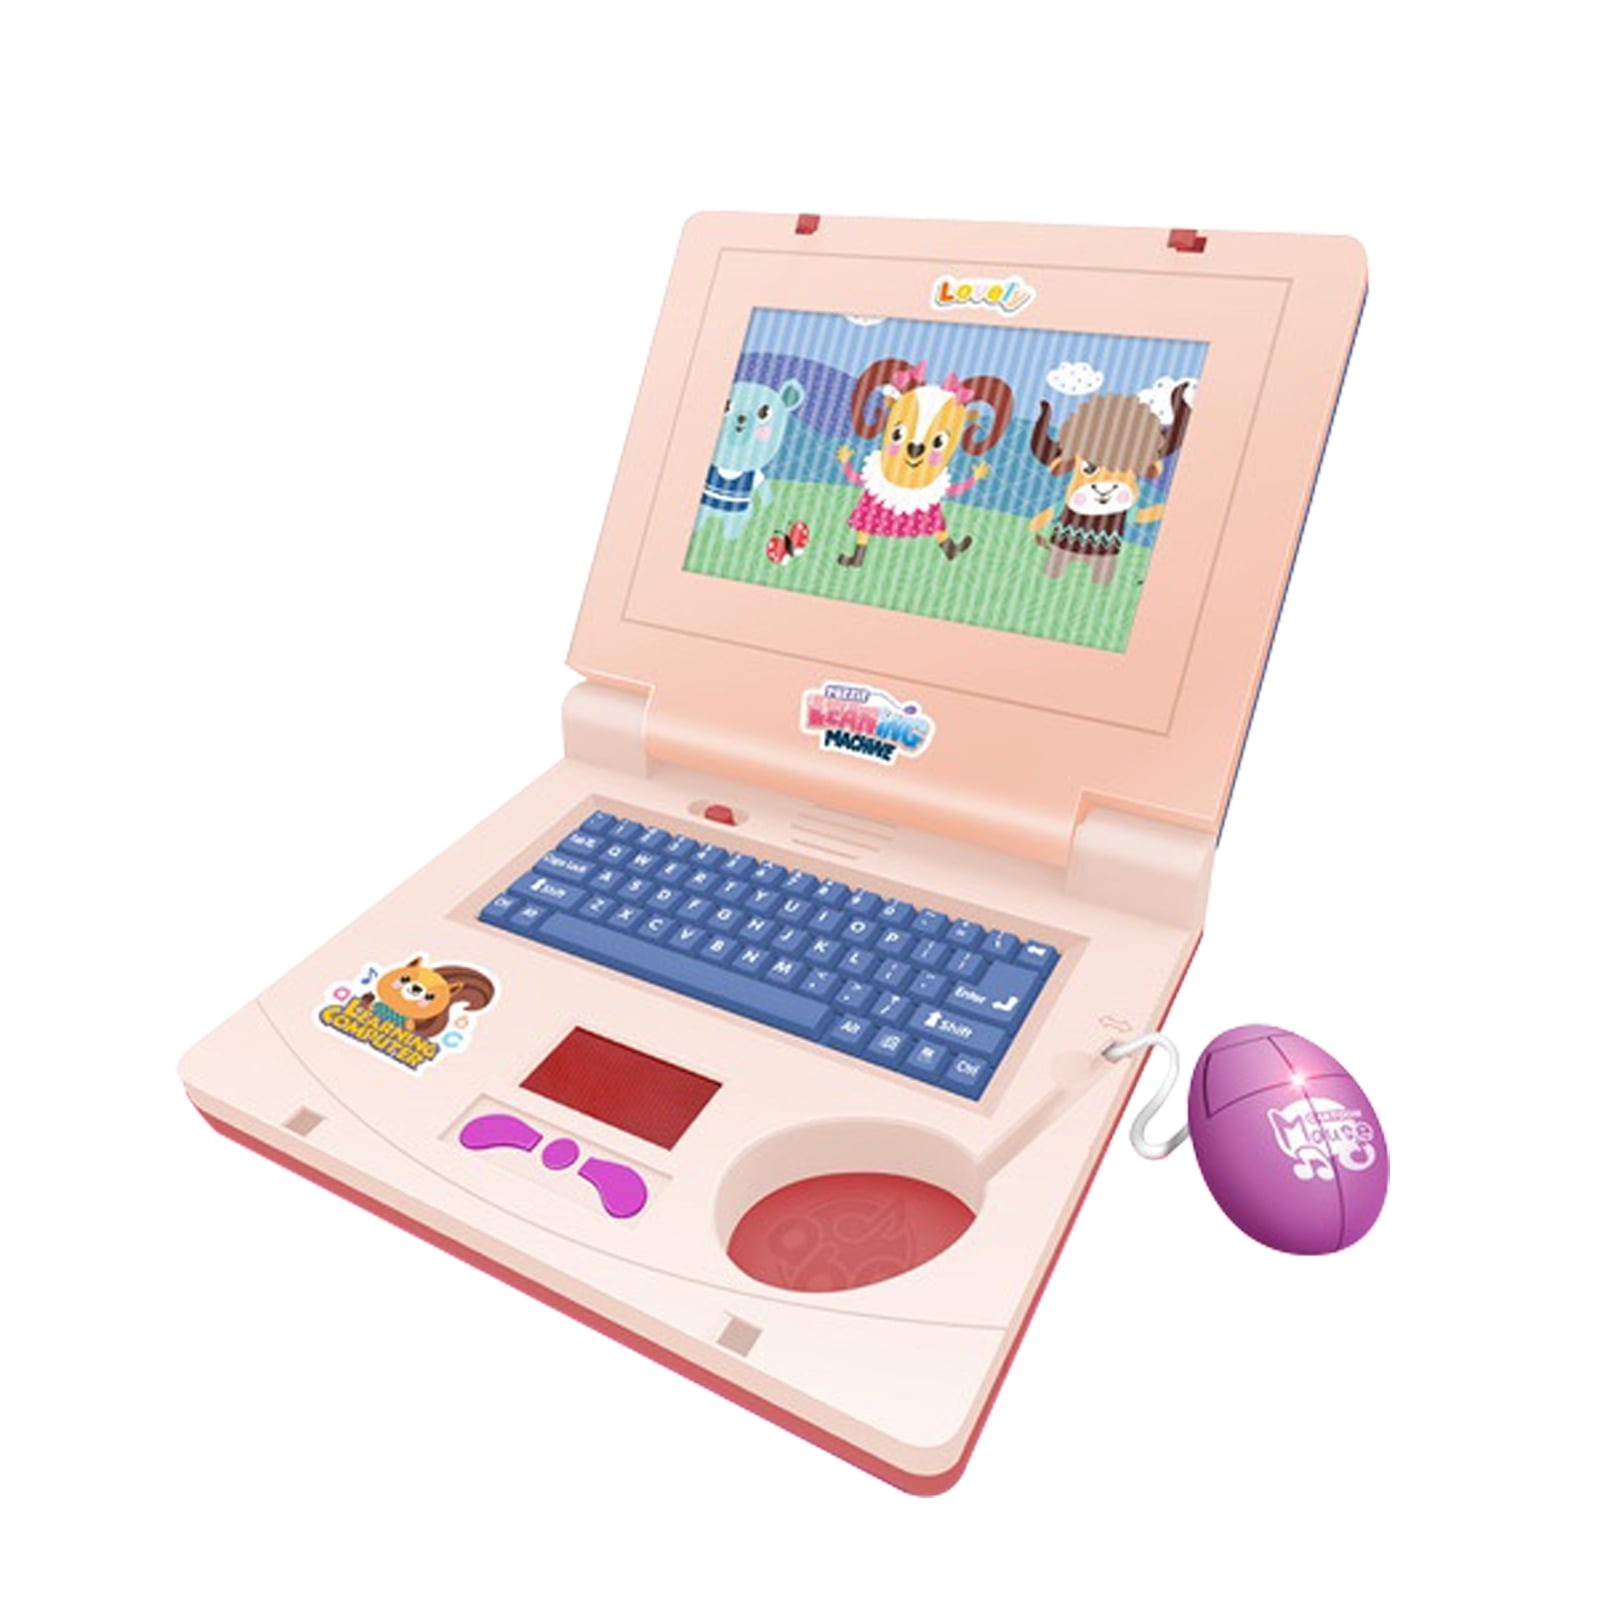 LEXiBOOK LAPTAB® 10, Laptop with Touch Screen, Designed for The Whole  Family, Educational and Fun Content, Powered by Android™, Parental Control